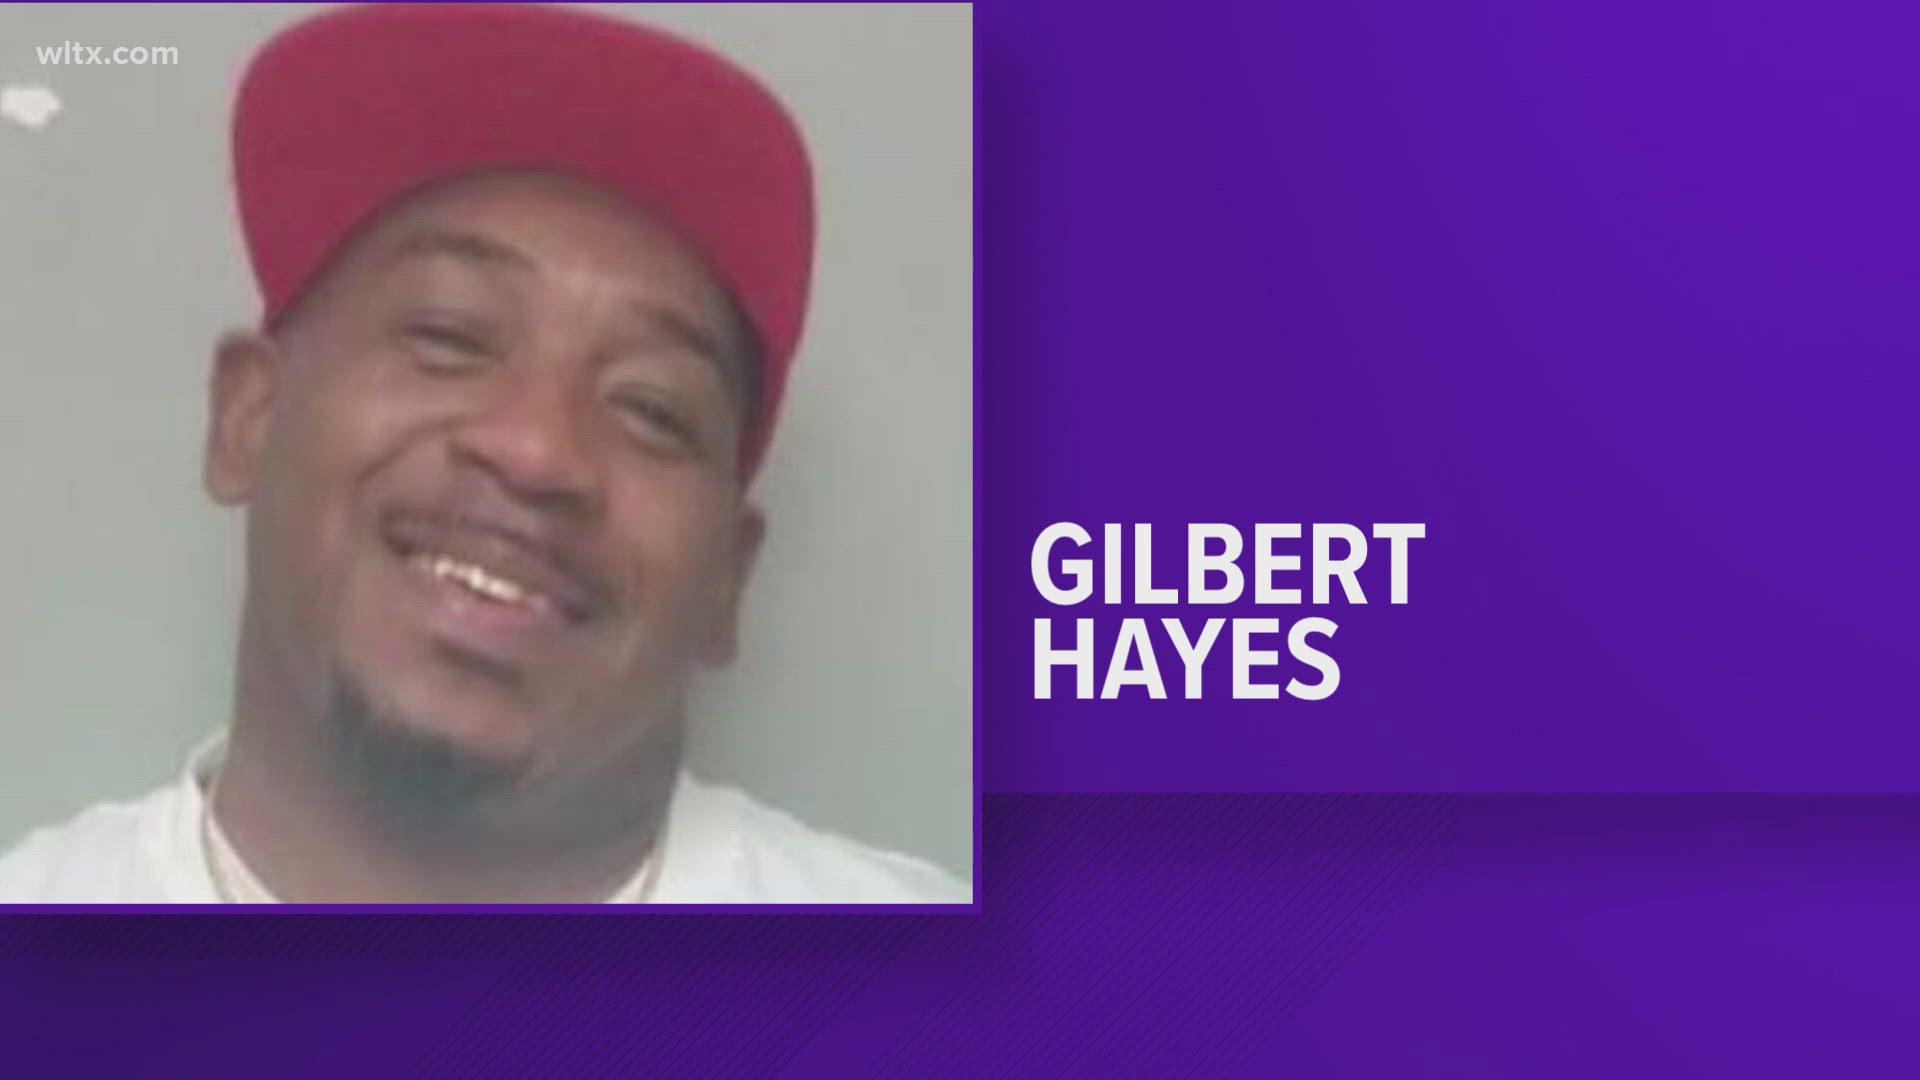 Gilbert Hayes, 50, was last seen a week ago on Sunday morning after he was discharged from Prisma Health Toumey.